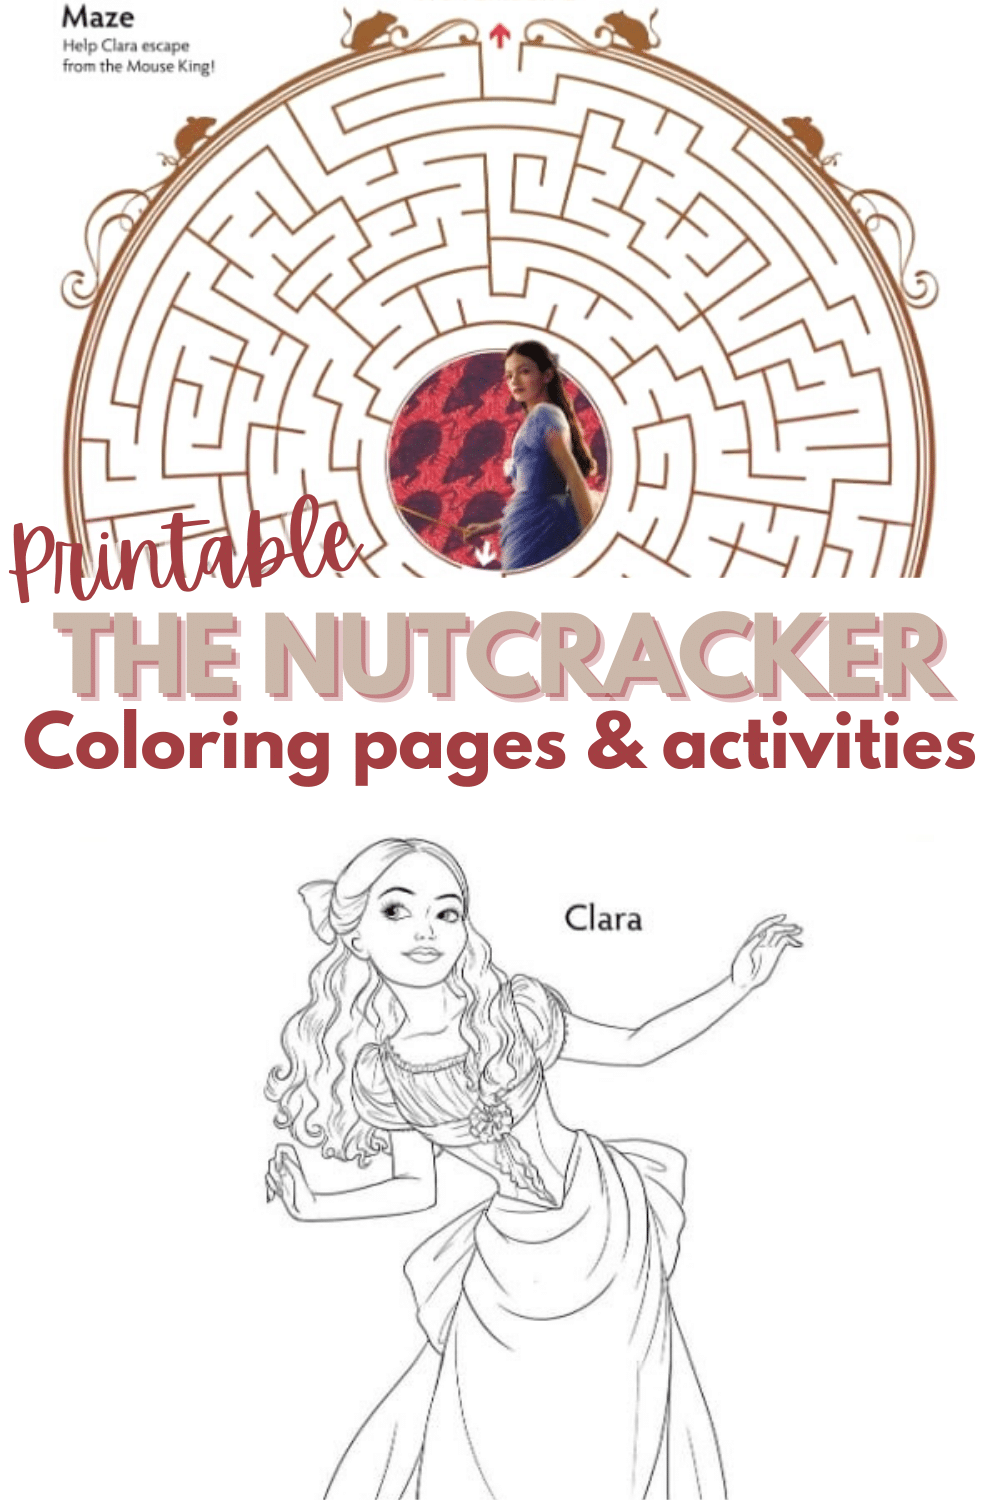 This activity book has 11 different Nutcracker coloring pages, 3 activities and printable bookmarks too! Completely free to download and print. #TheNutcracker #printables #activitybook #coloringpages via @wondermomwannab